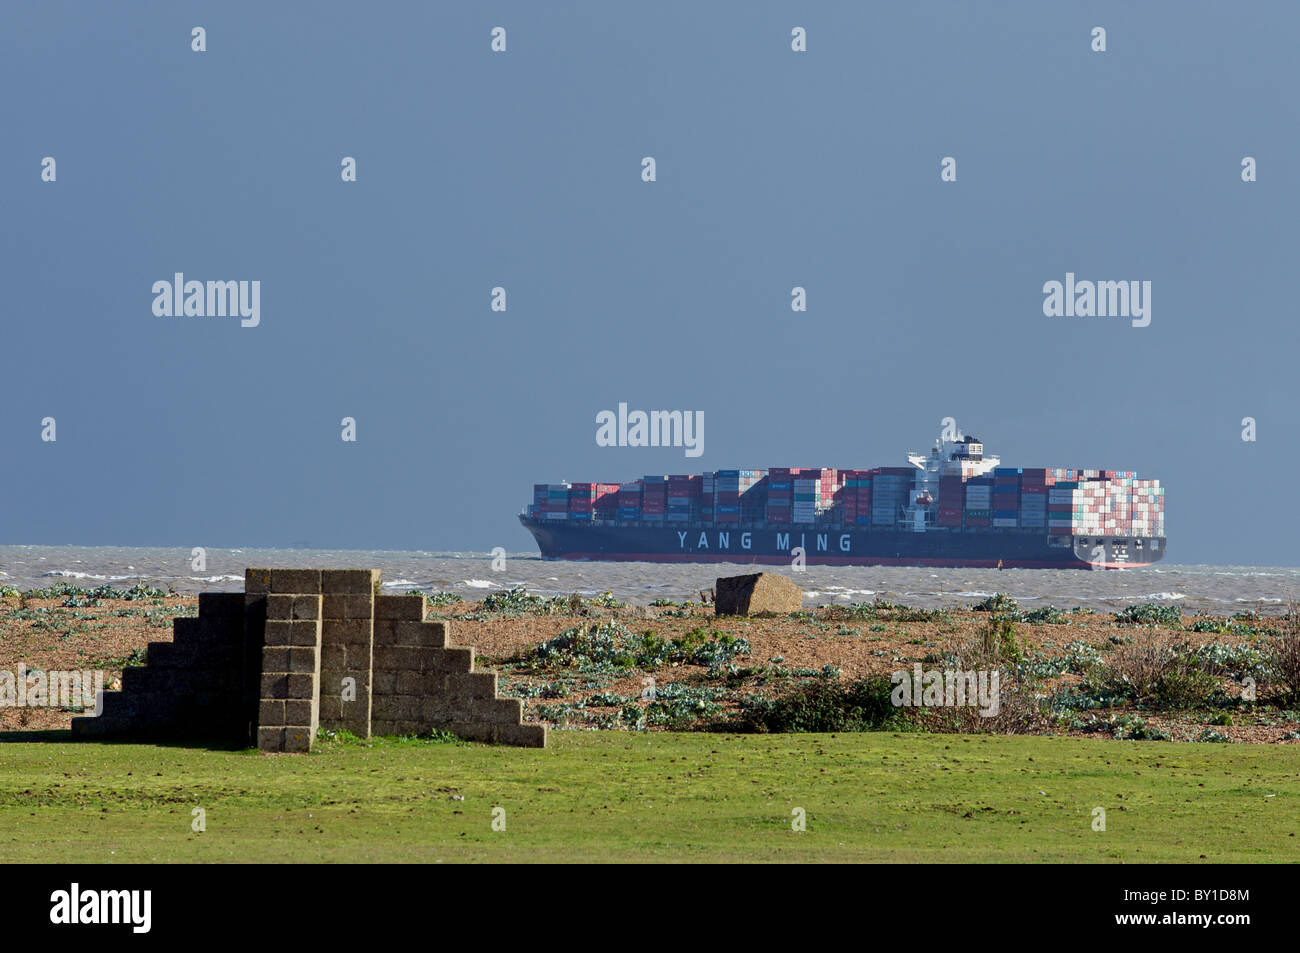 Yang Ming nave container Foto Stock